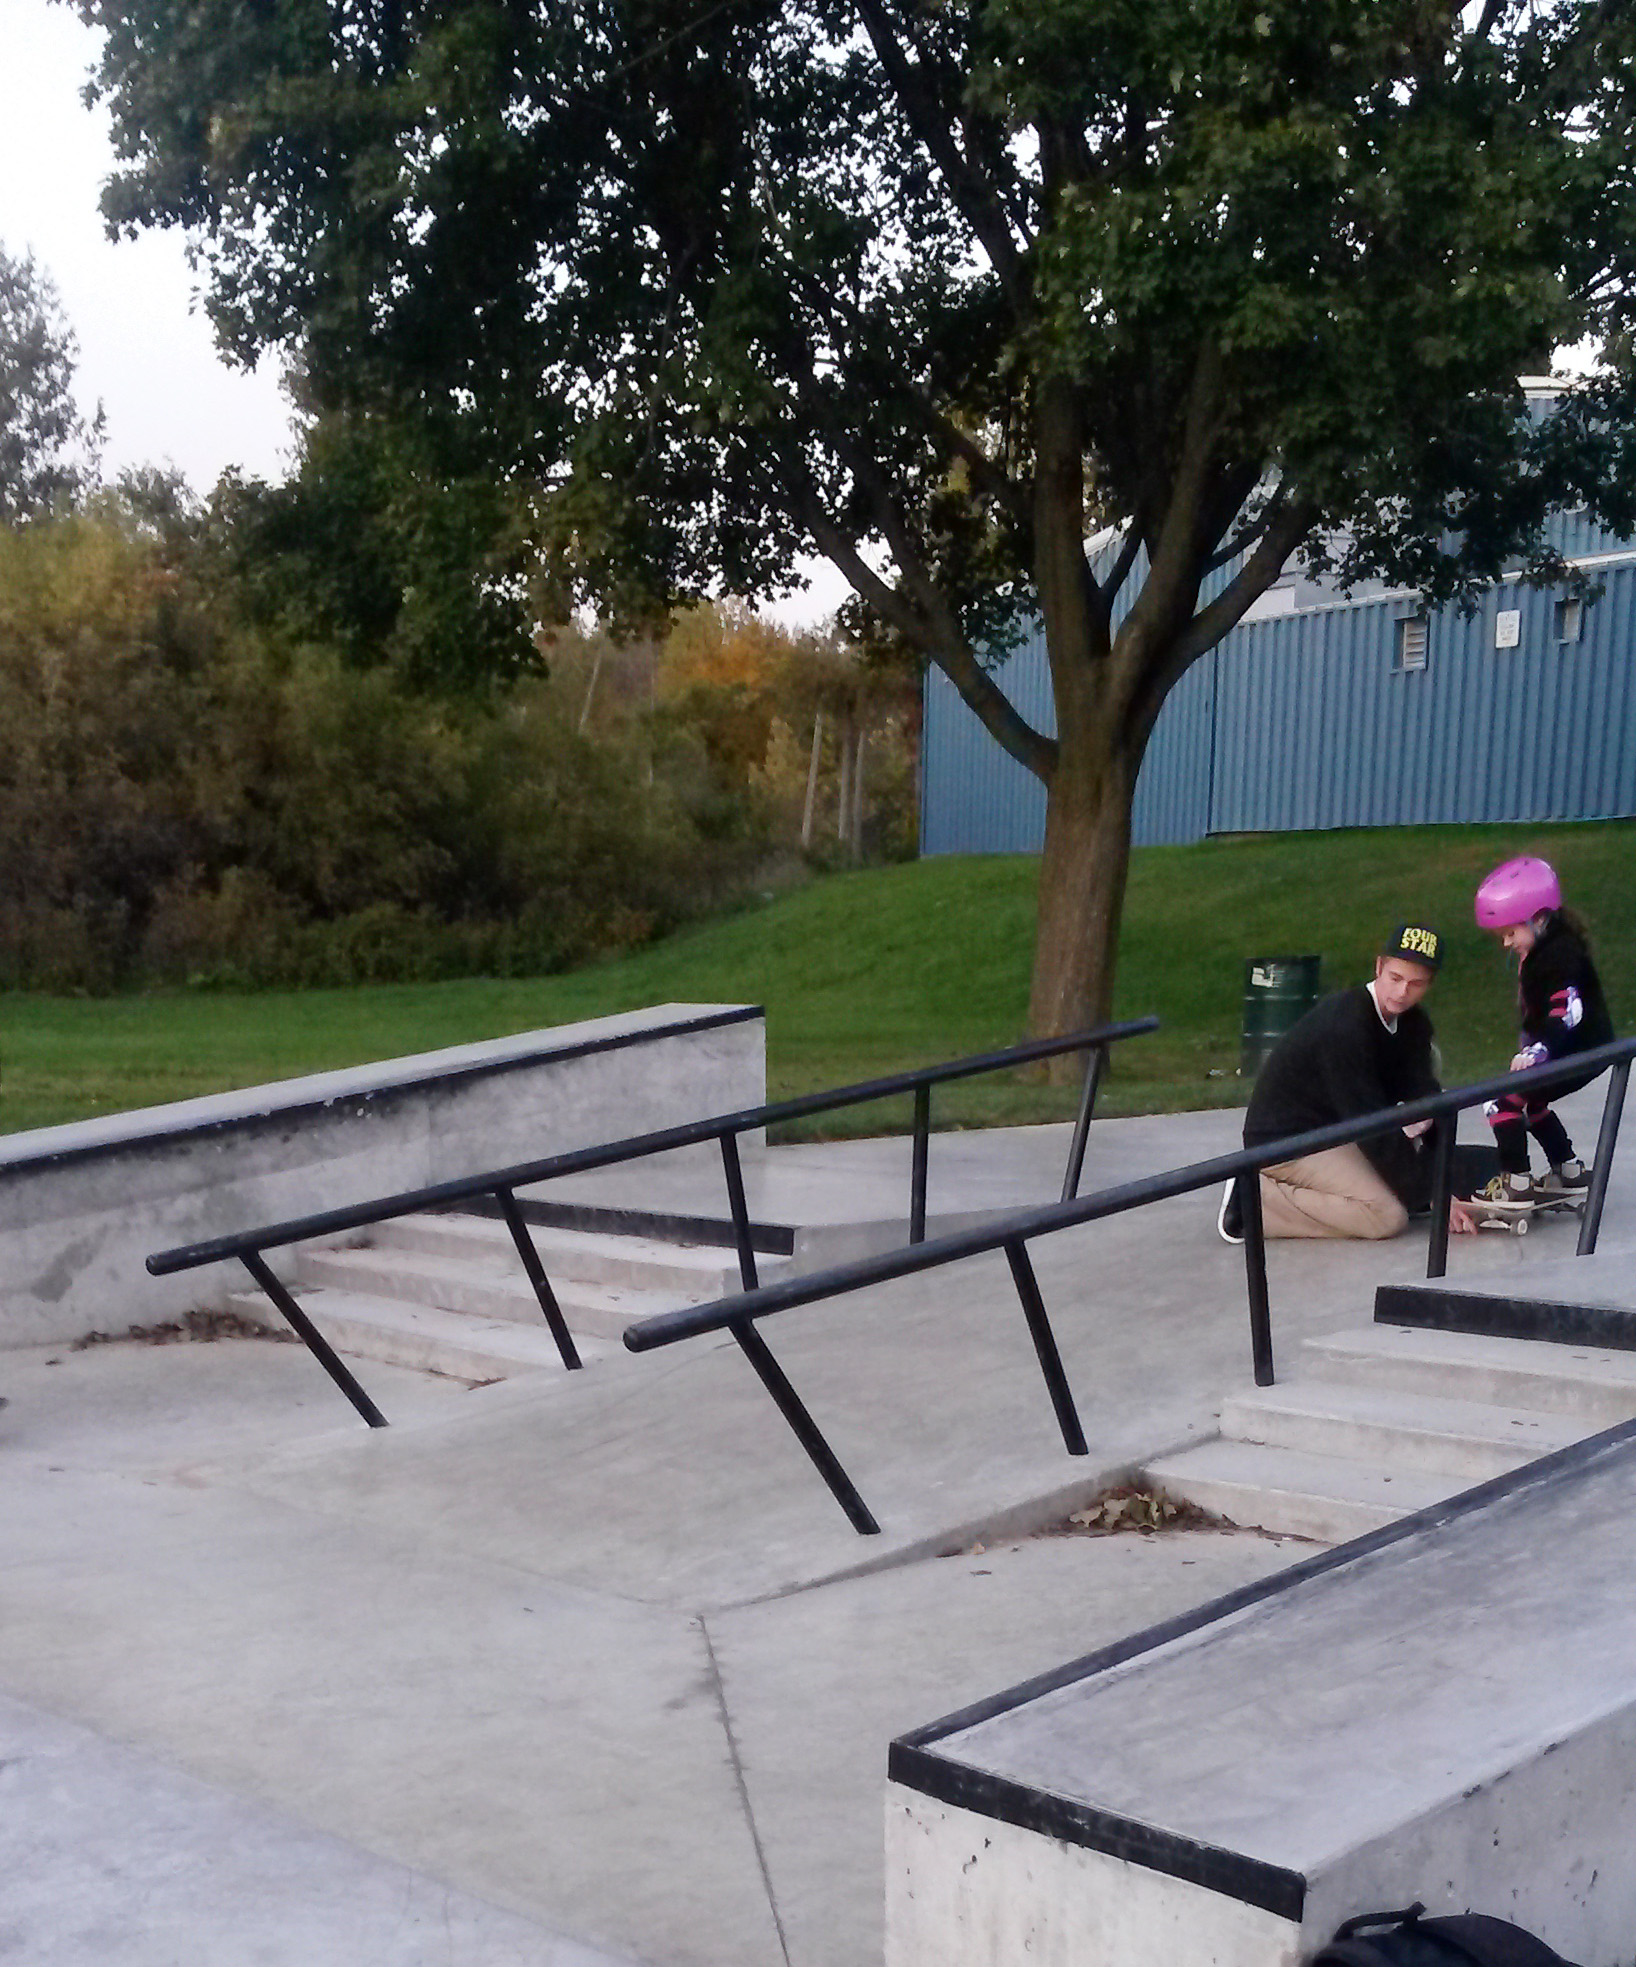 PHOTO: Jeanean Thomas of Ontario, Canada shared photos of her daughter learning how to skateboard at a skate park on Oct. 10, 2015 with the help of a local skater.